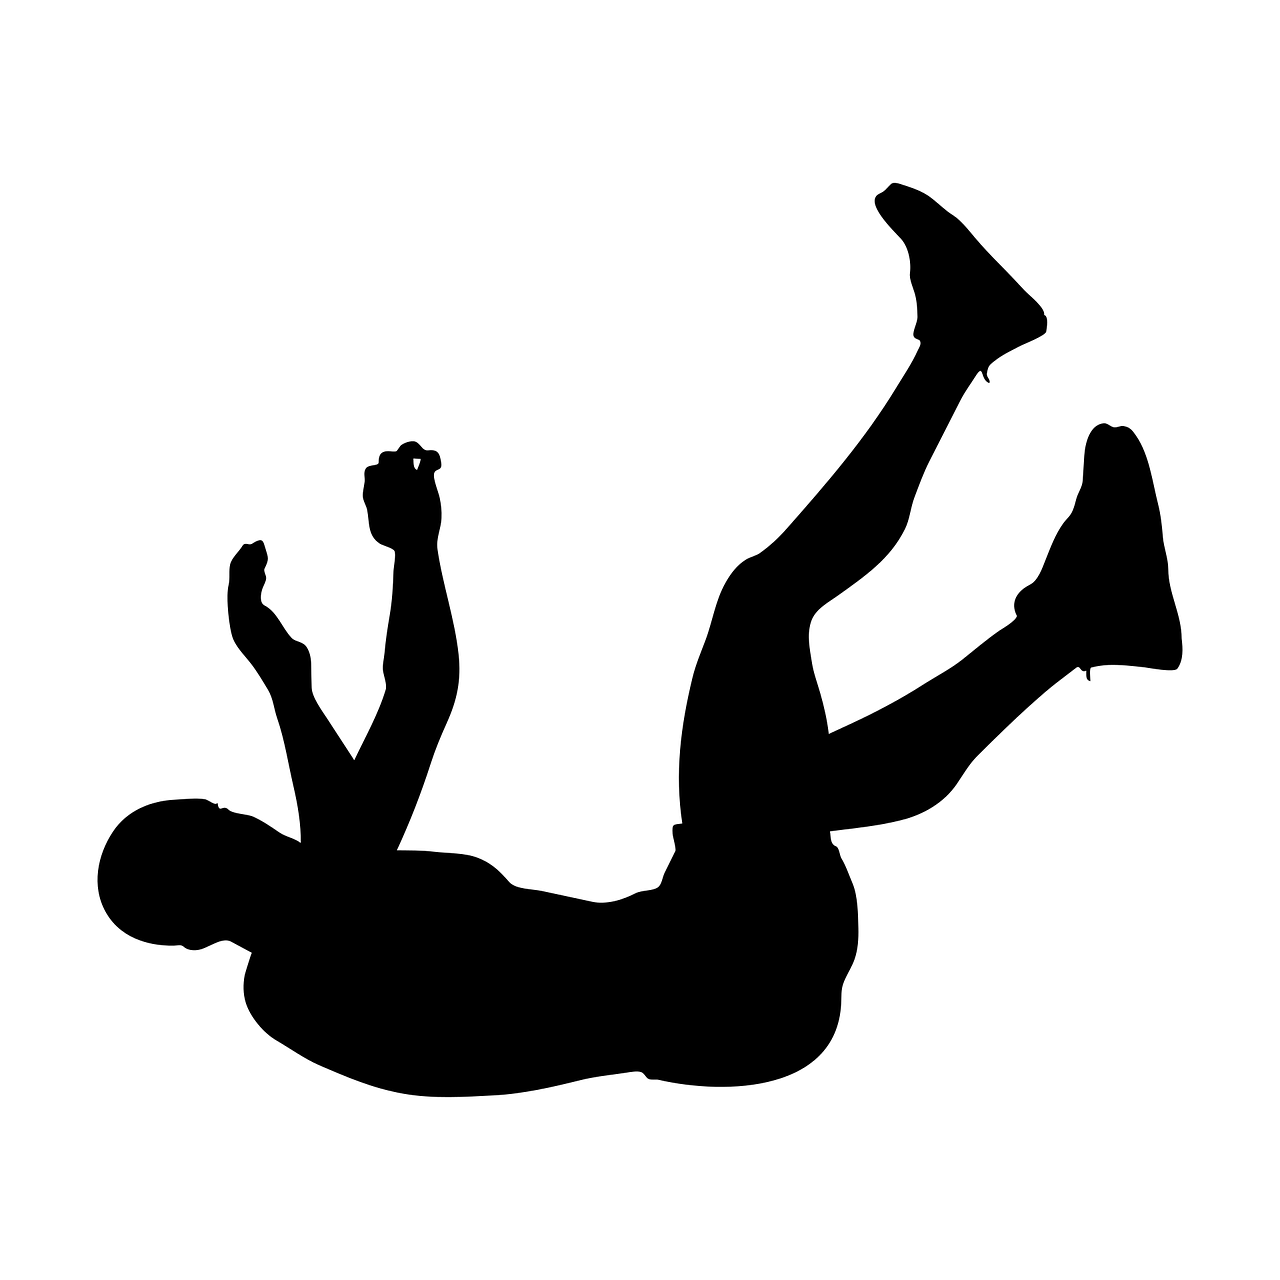 Picture illustrating falling with MS